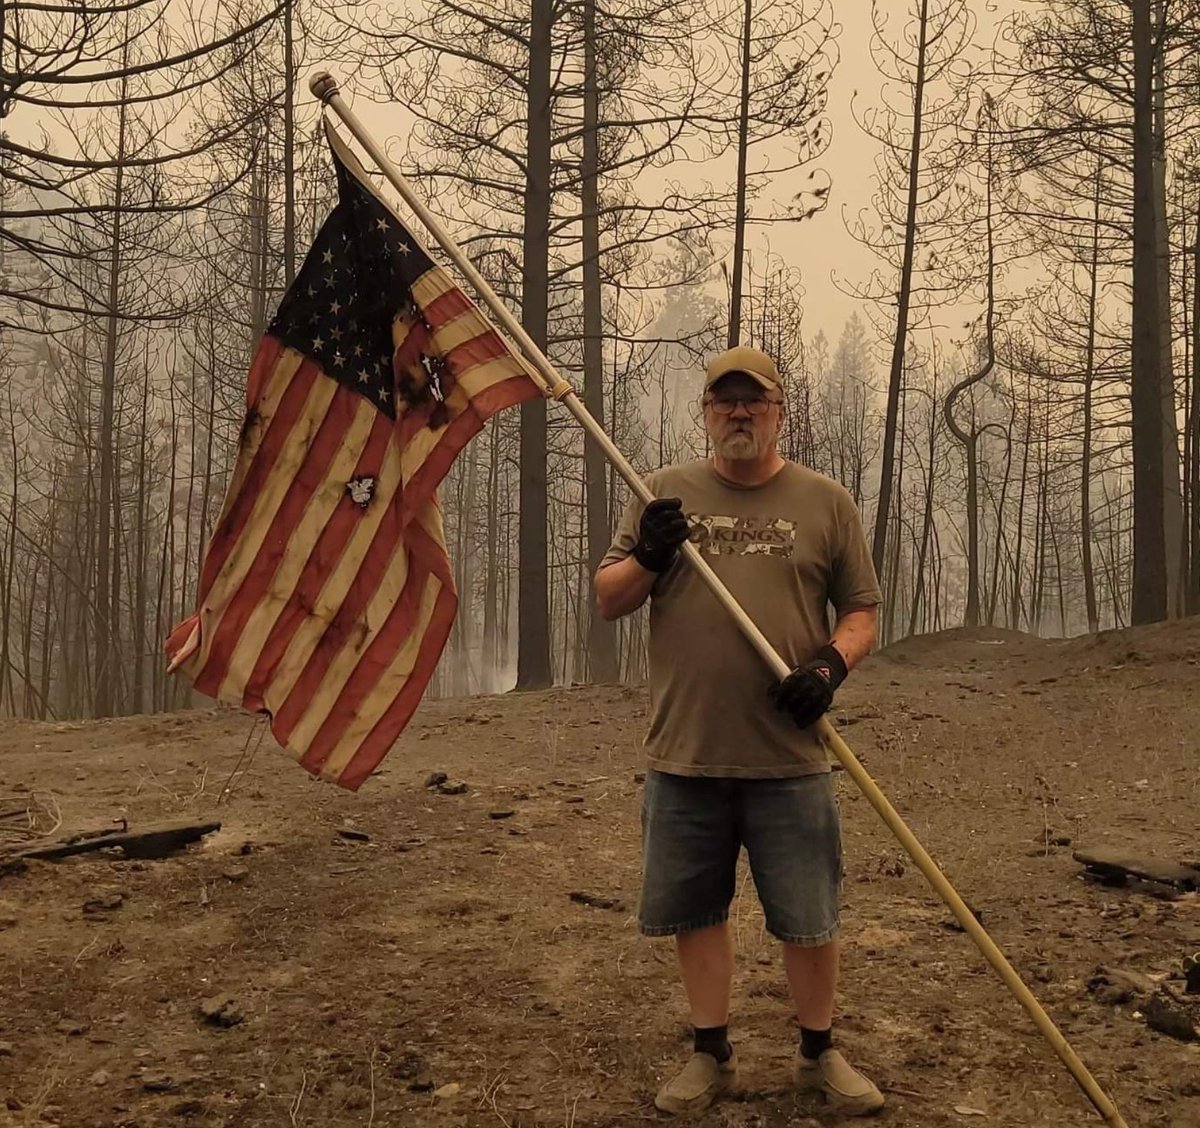 This is Art Dibble. He lost everything, this flag was the only thing left. It was laying on the ground with everything burned around it.#elkfire #OregonRoadFire #wastatefires #wildfires #spokane #SpokaneCounty #spokanefires